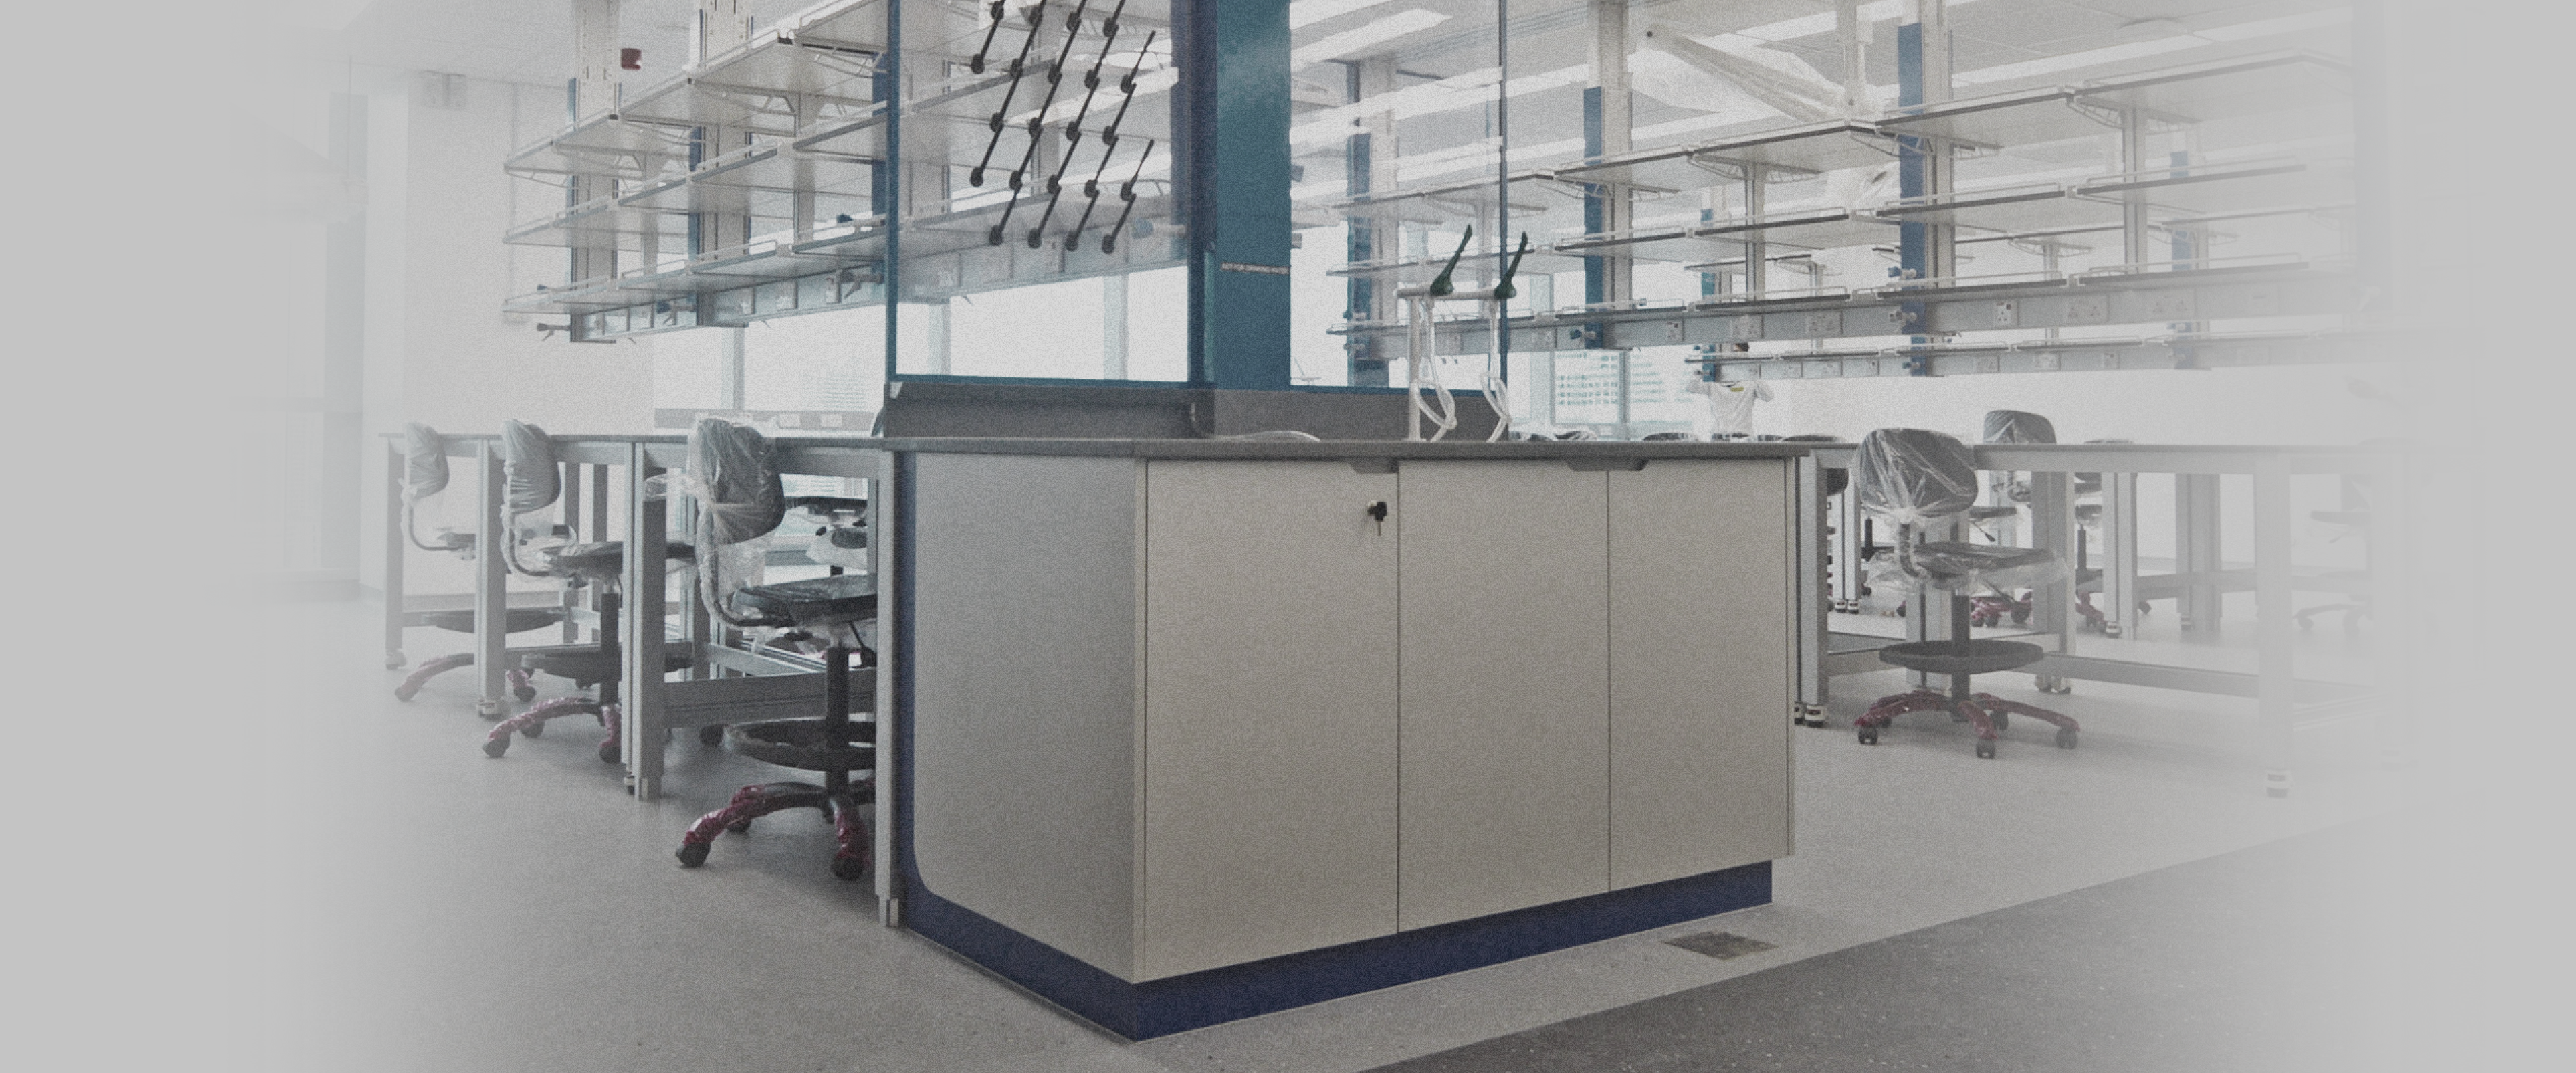 Leading Laboratory grade furniture cabinets and lab benches in Singapore, (KSA) Saudi Arabia, and the middle east